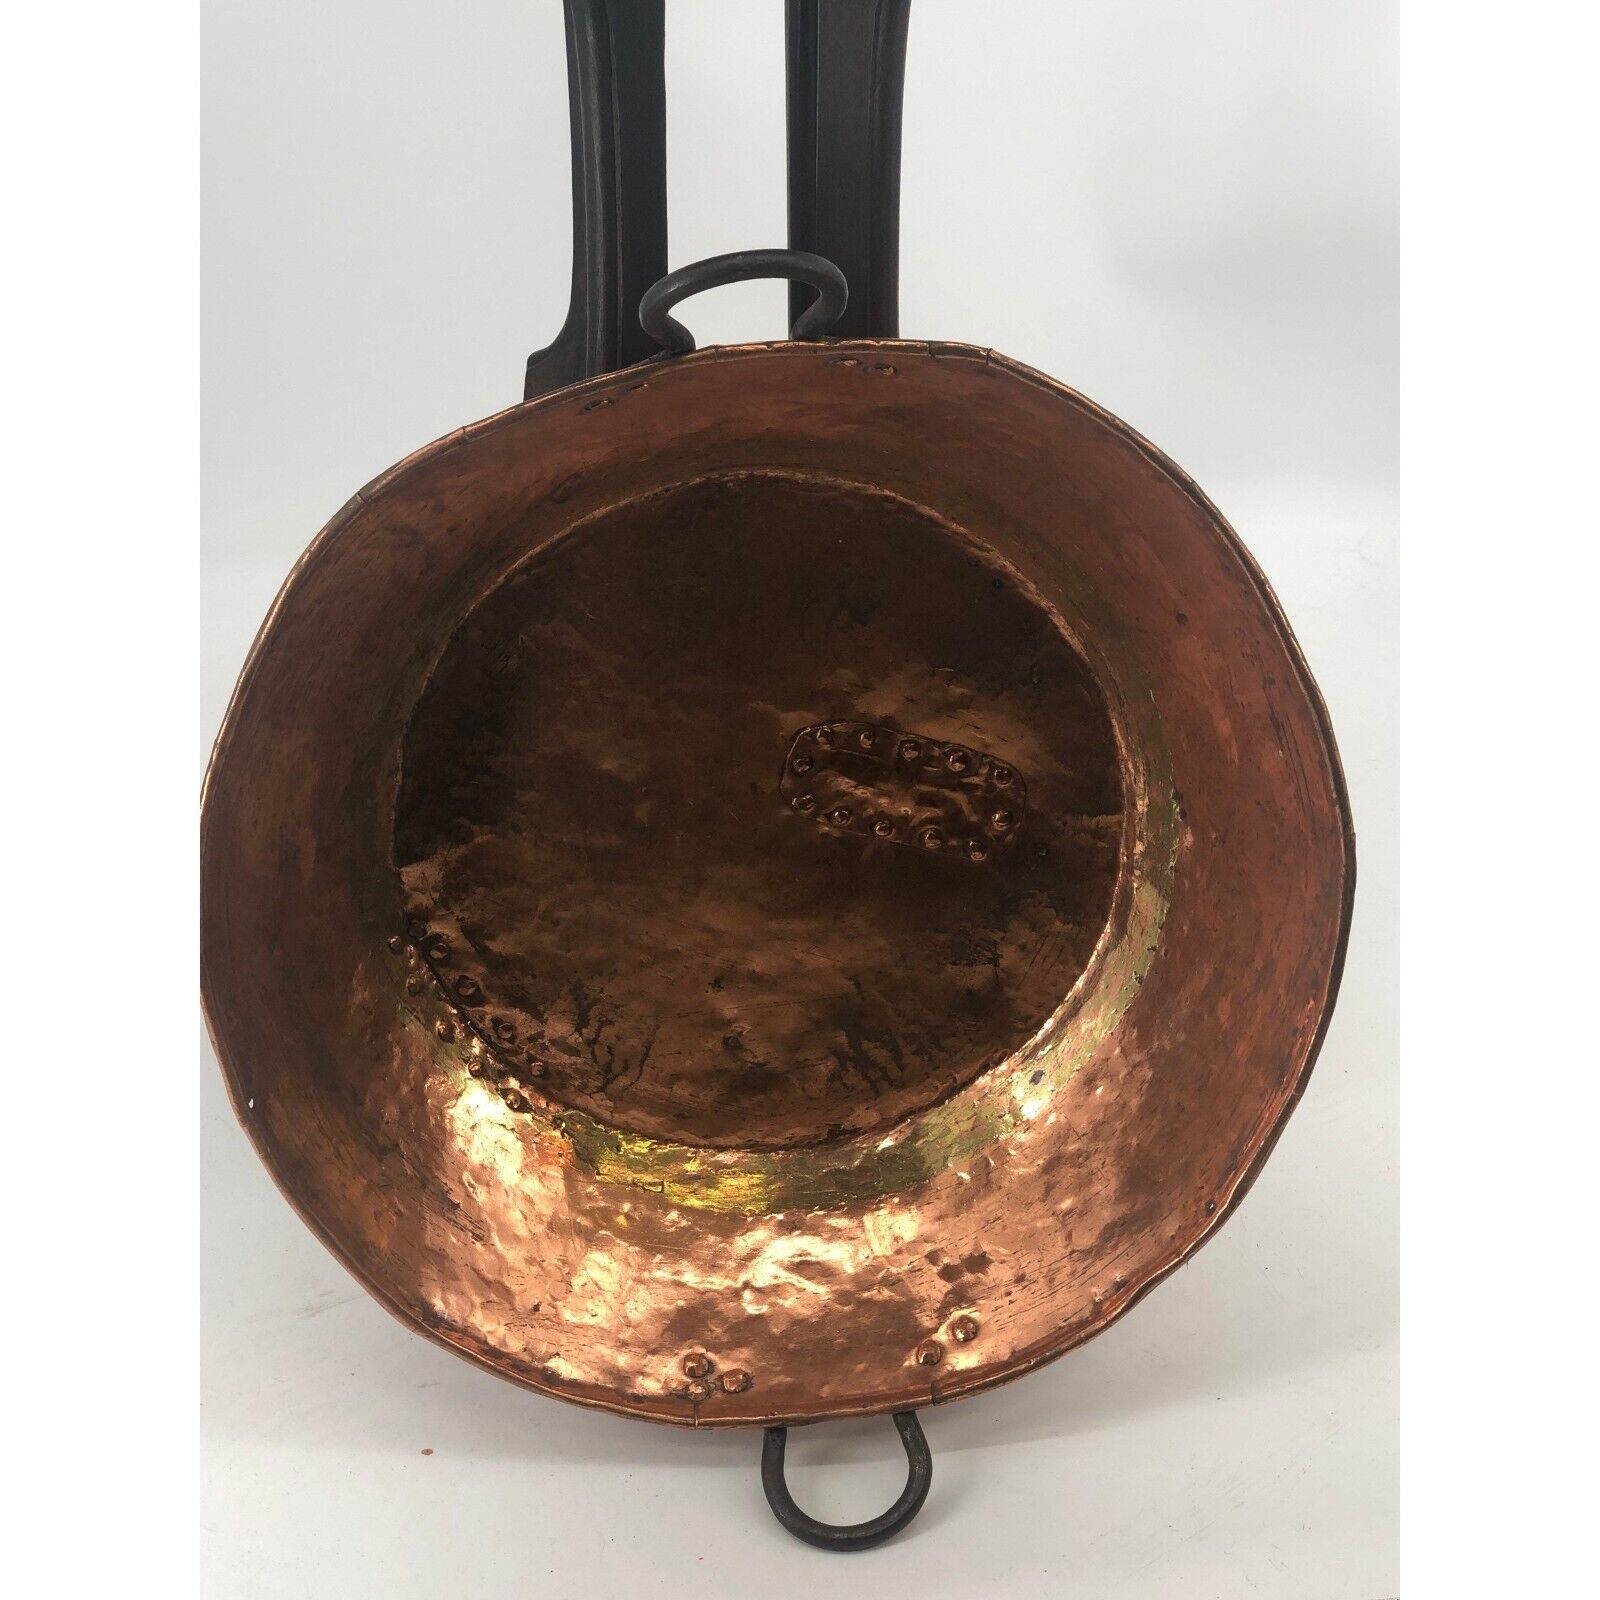 Antique Copper Brass and Wrought Iron Pan Bowl Skillet Kettle